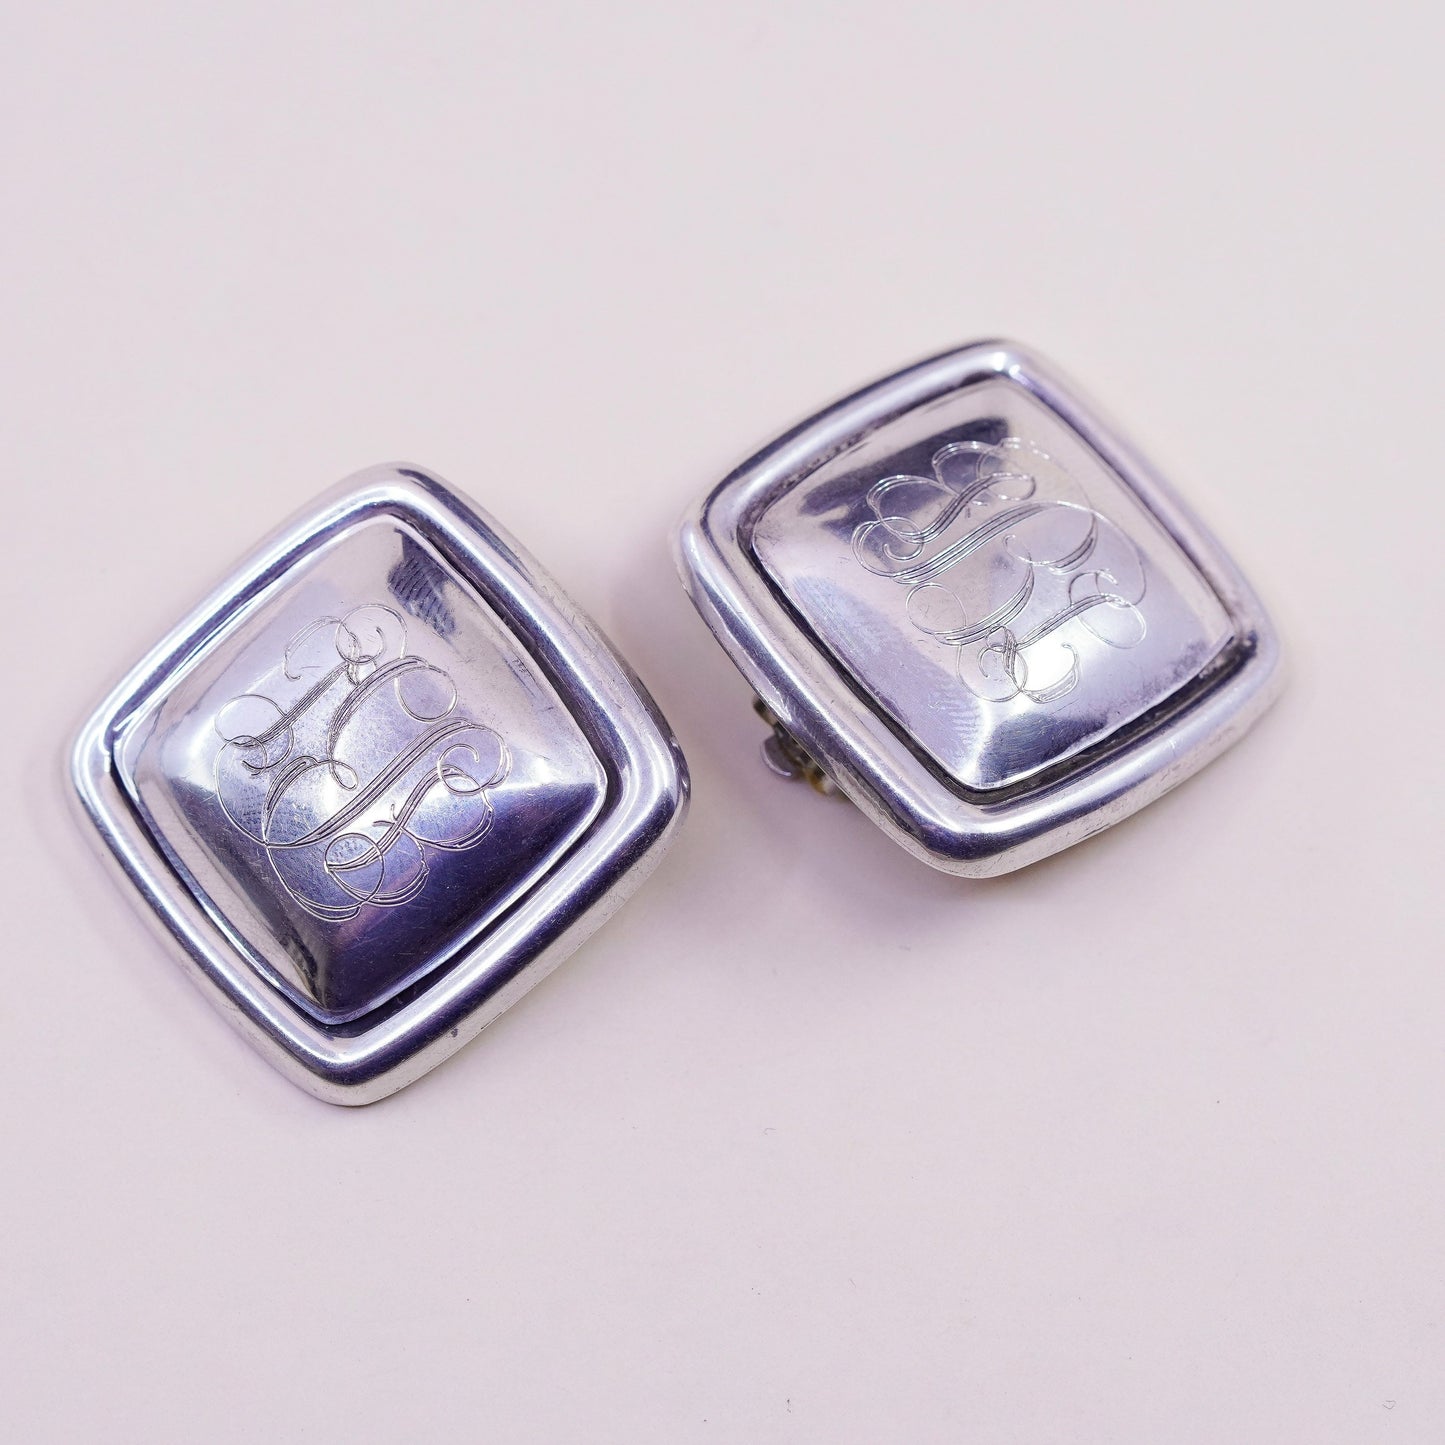 Vintage Sterling silver clip on earrings, Modern 925 square with monogram “GBL”